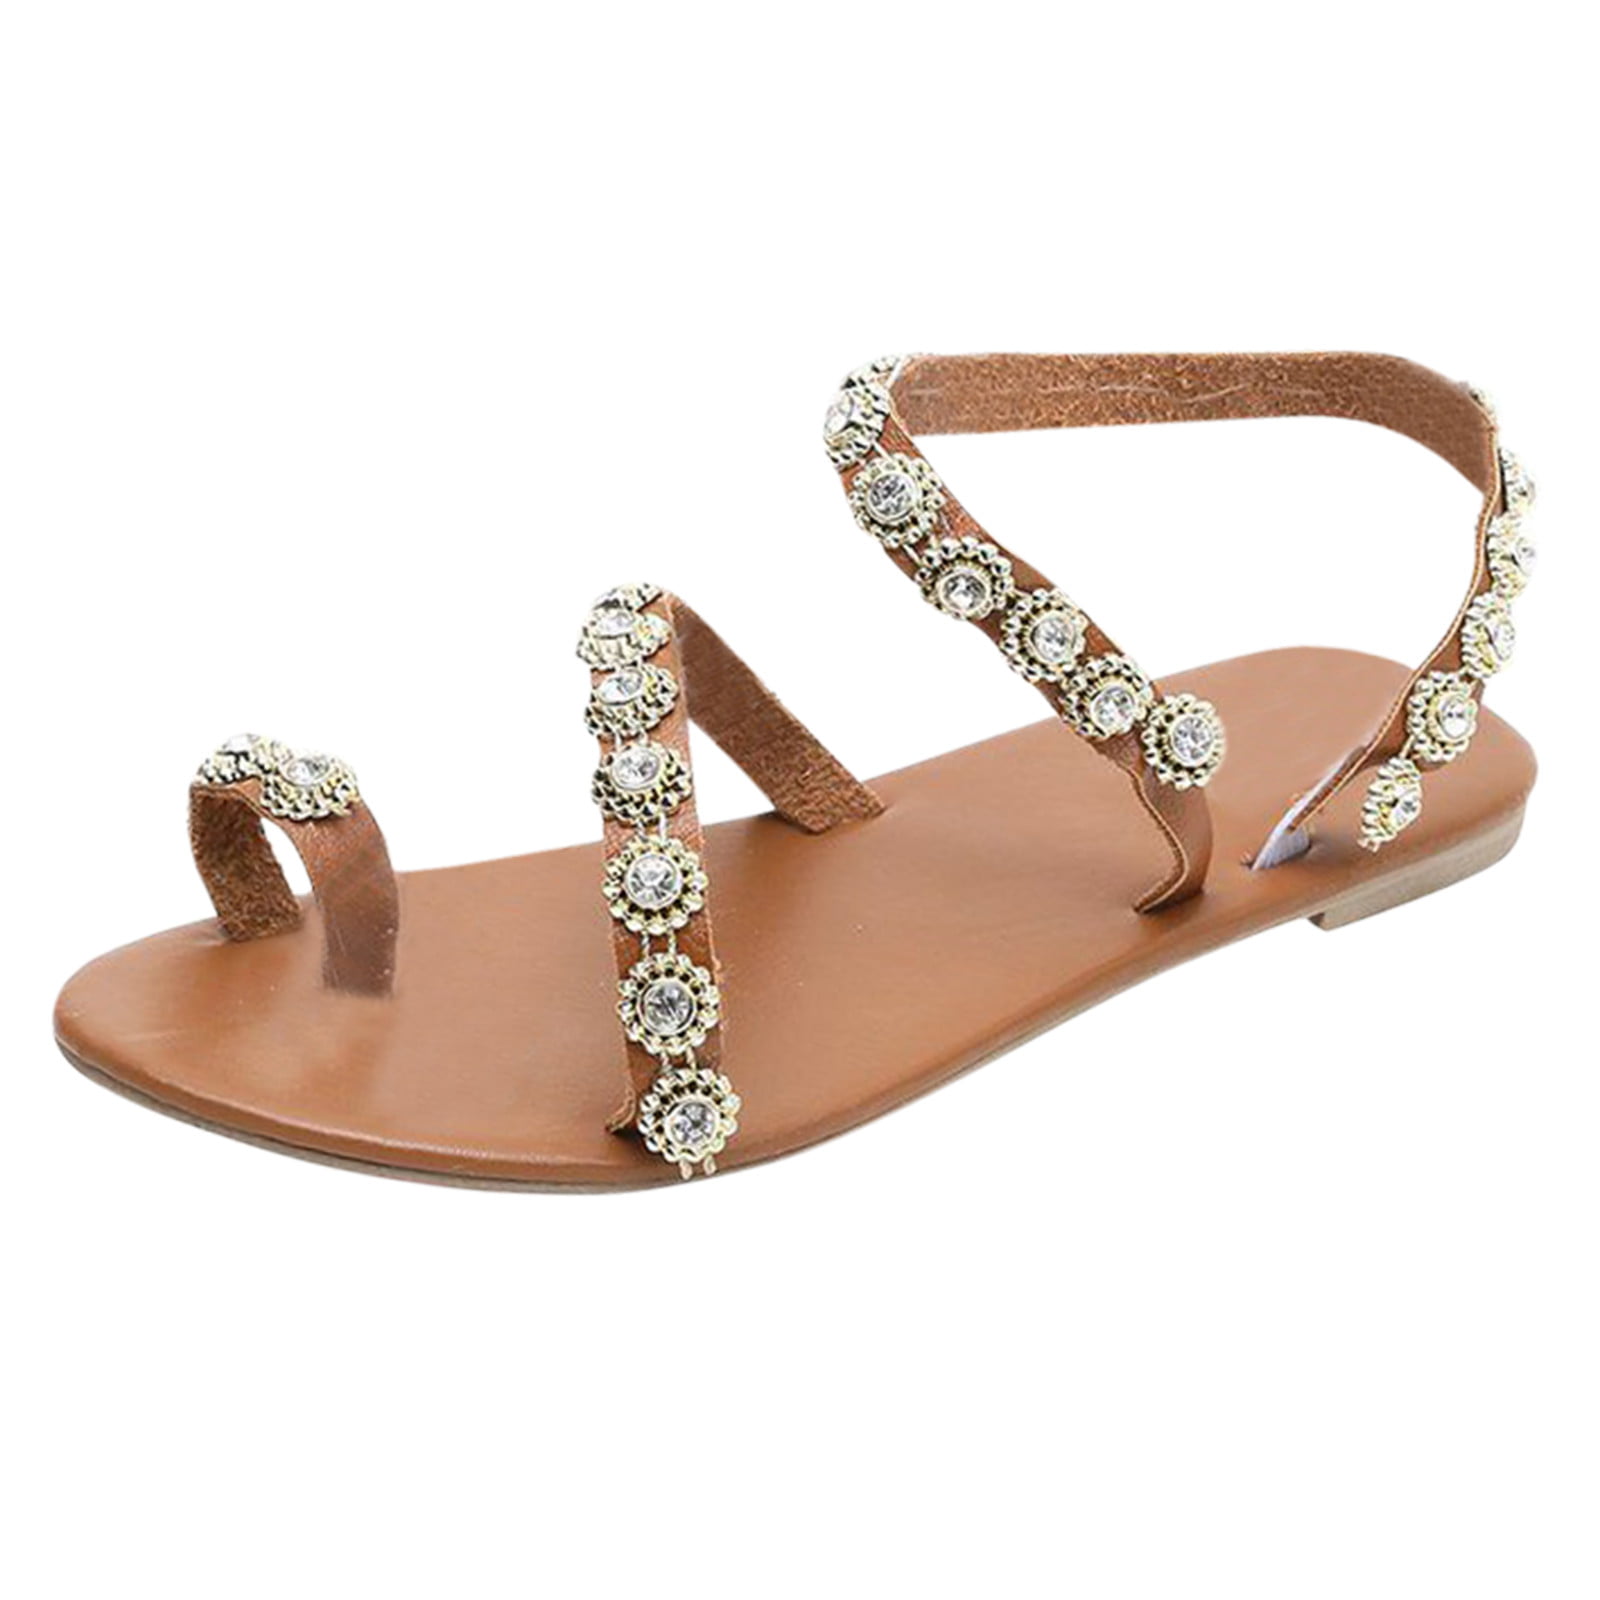 Summer Womens Flat Crystal Slippers Beach Sandals Ladies Roman Shoes Size 